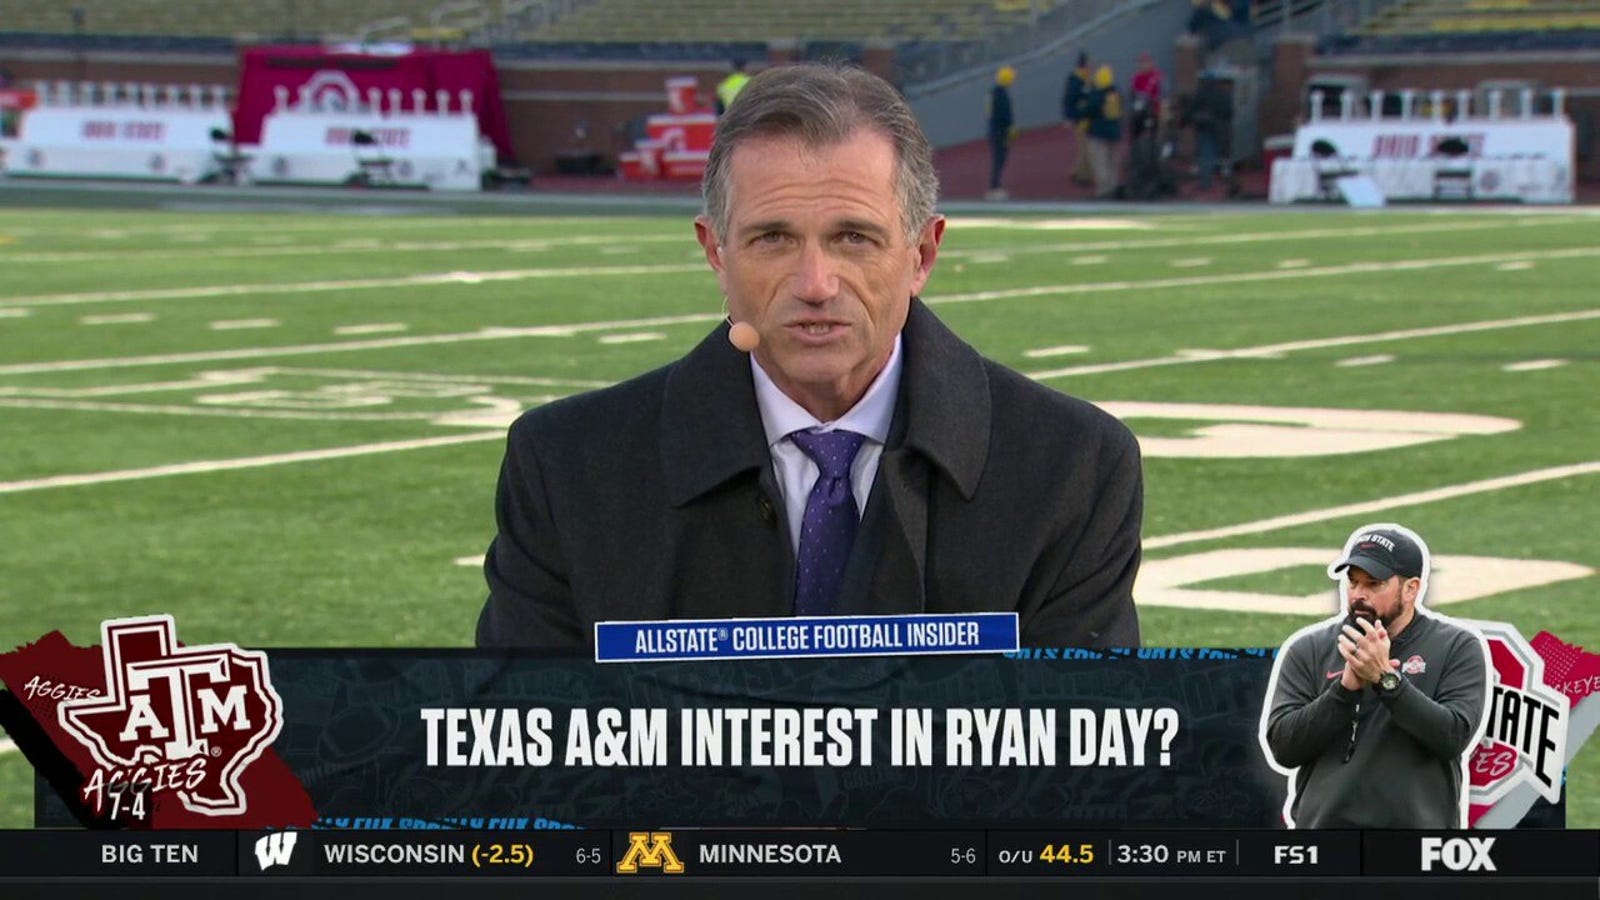 Texas A&M interest in Ohio State head coach Ryan Day?